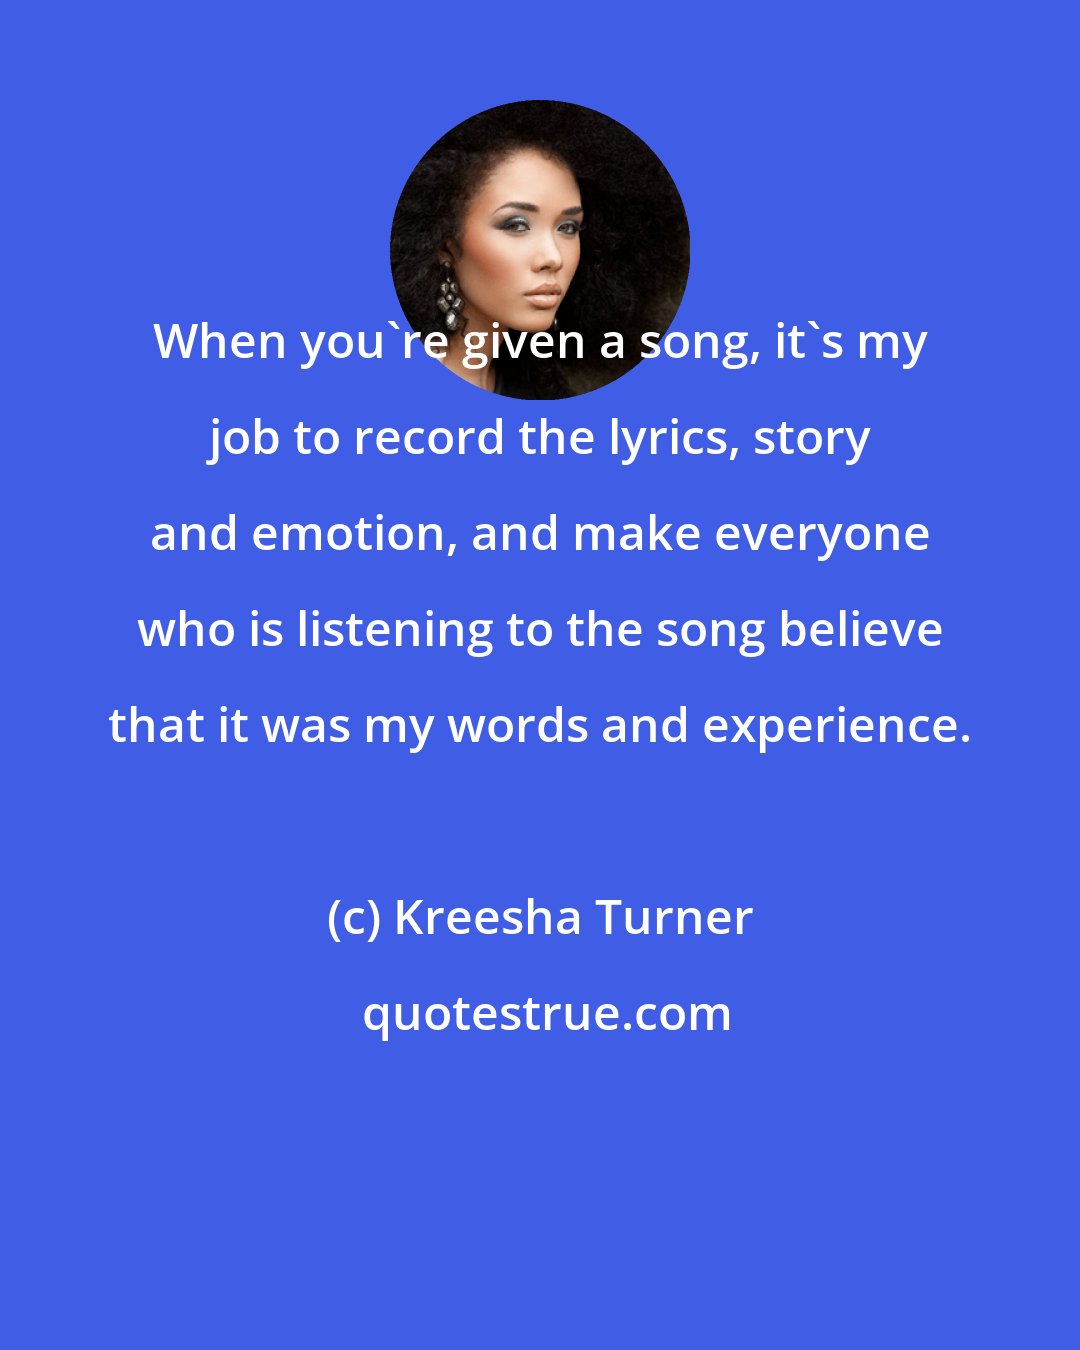 Kreesha Turner: When you're given a song, it's my job to record the lyrics, story and emotion, and make everyone who is listening to the song believe that it was my words and experience.